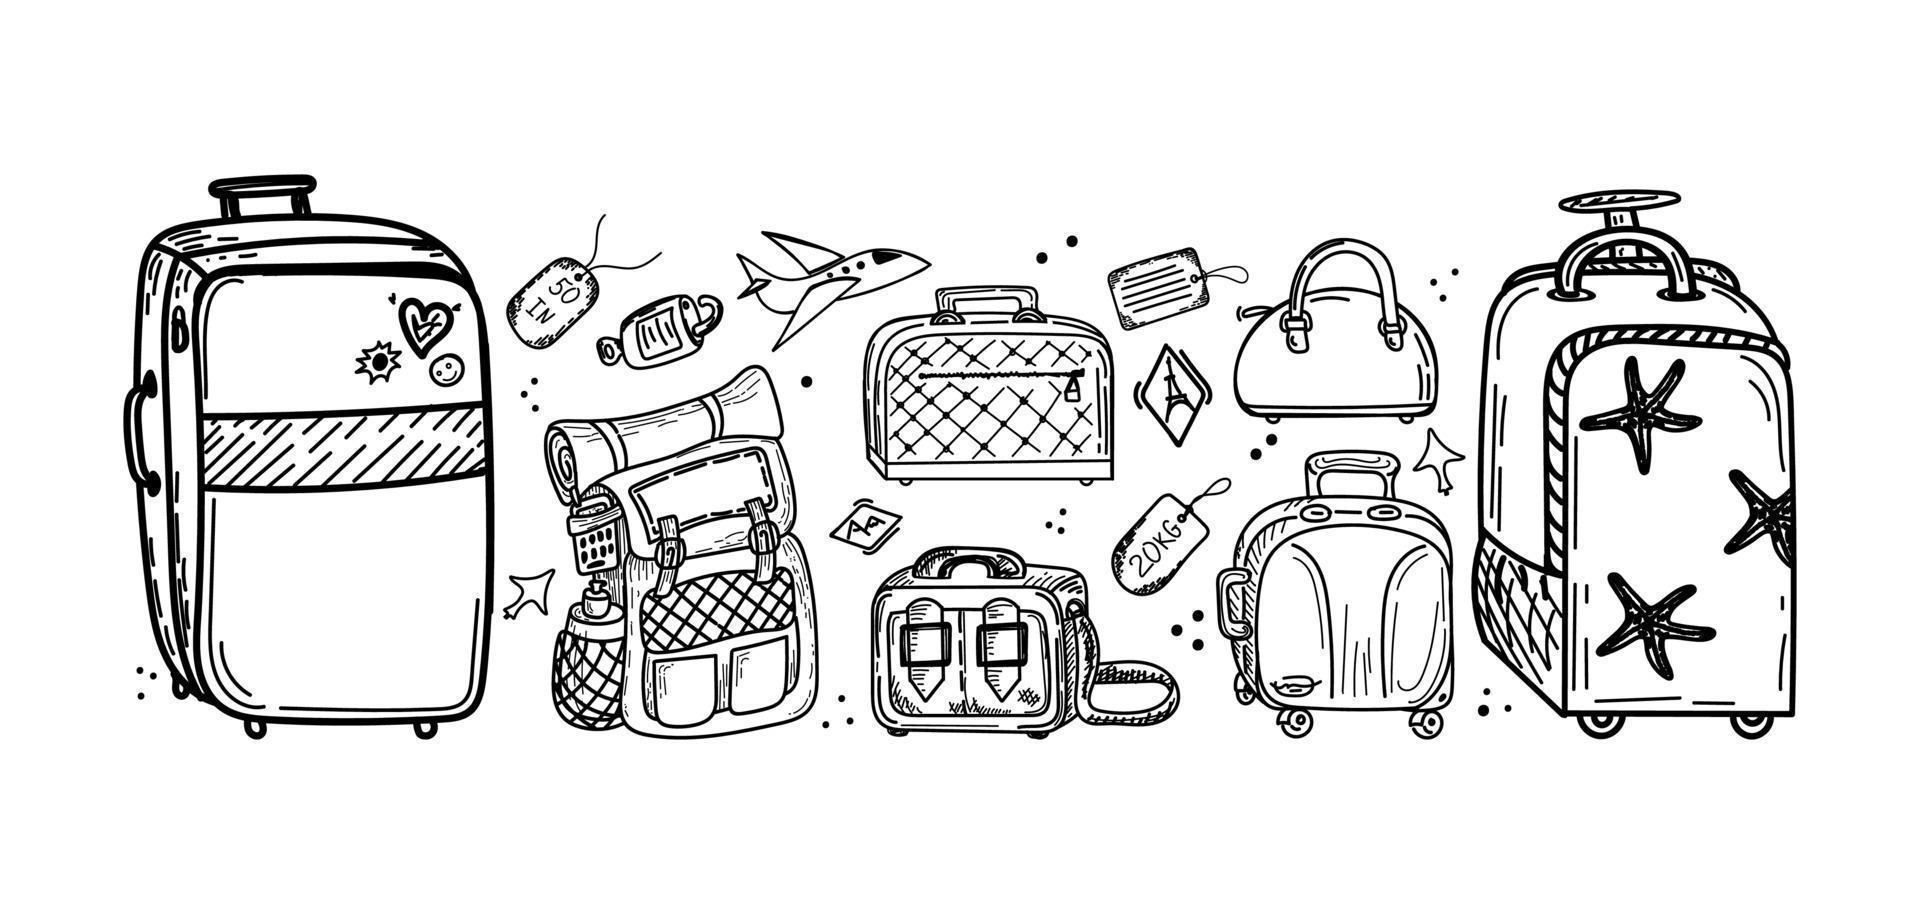 Set of different kinds of luggage, hand-drawn doodle in sketch style. Vector illustration. Large and small suitcase, small bag, hand luggage, valise, tags. Accessories. Airplane. Sketch